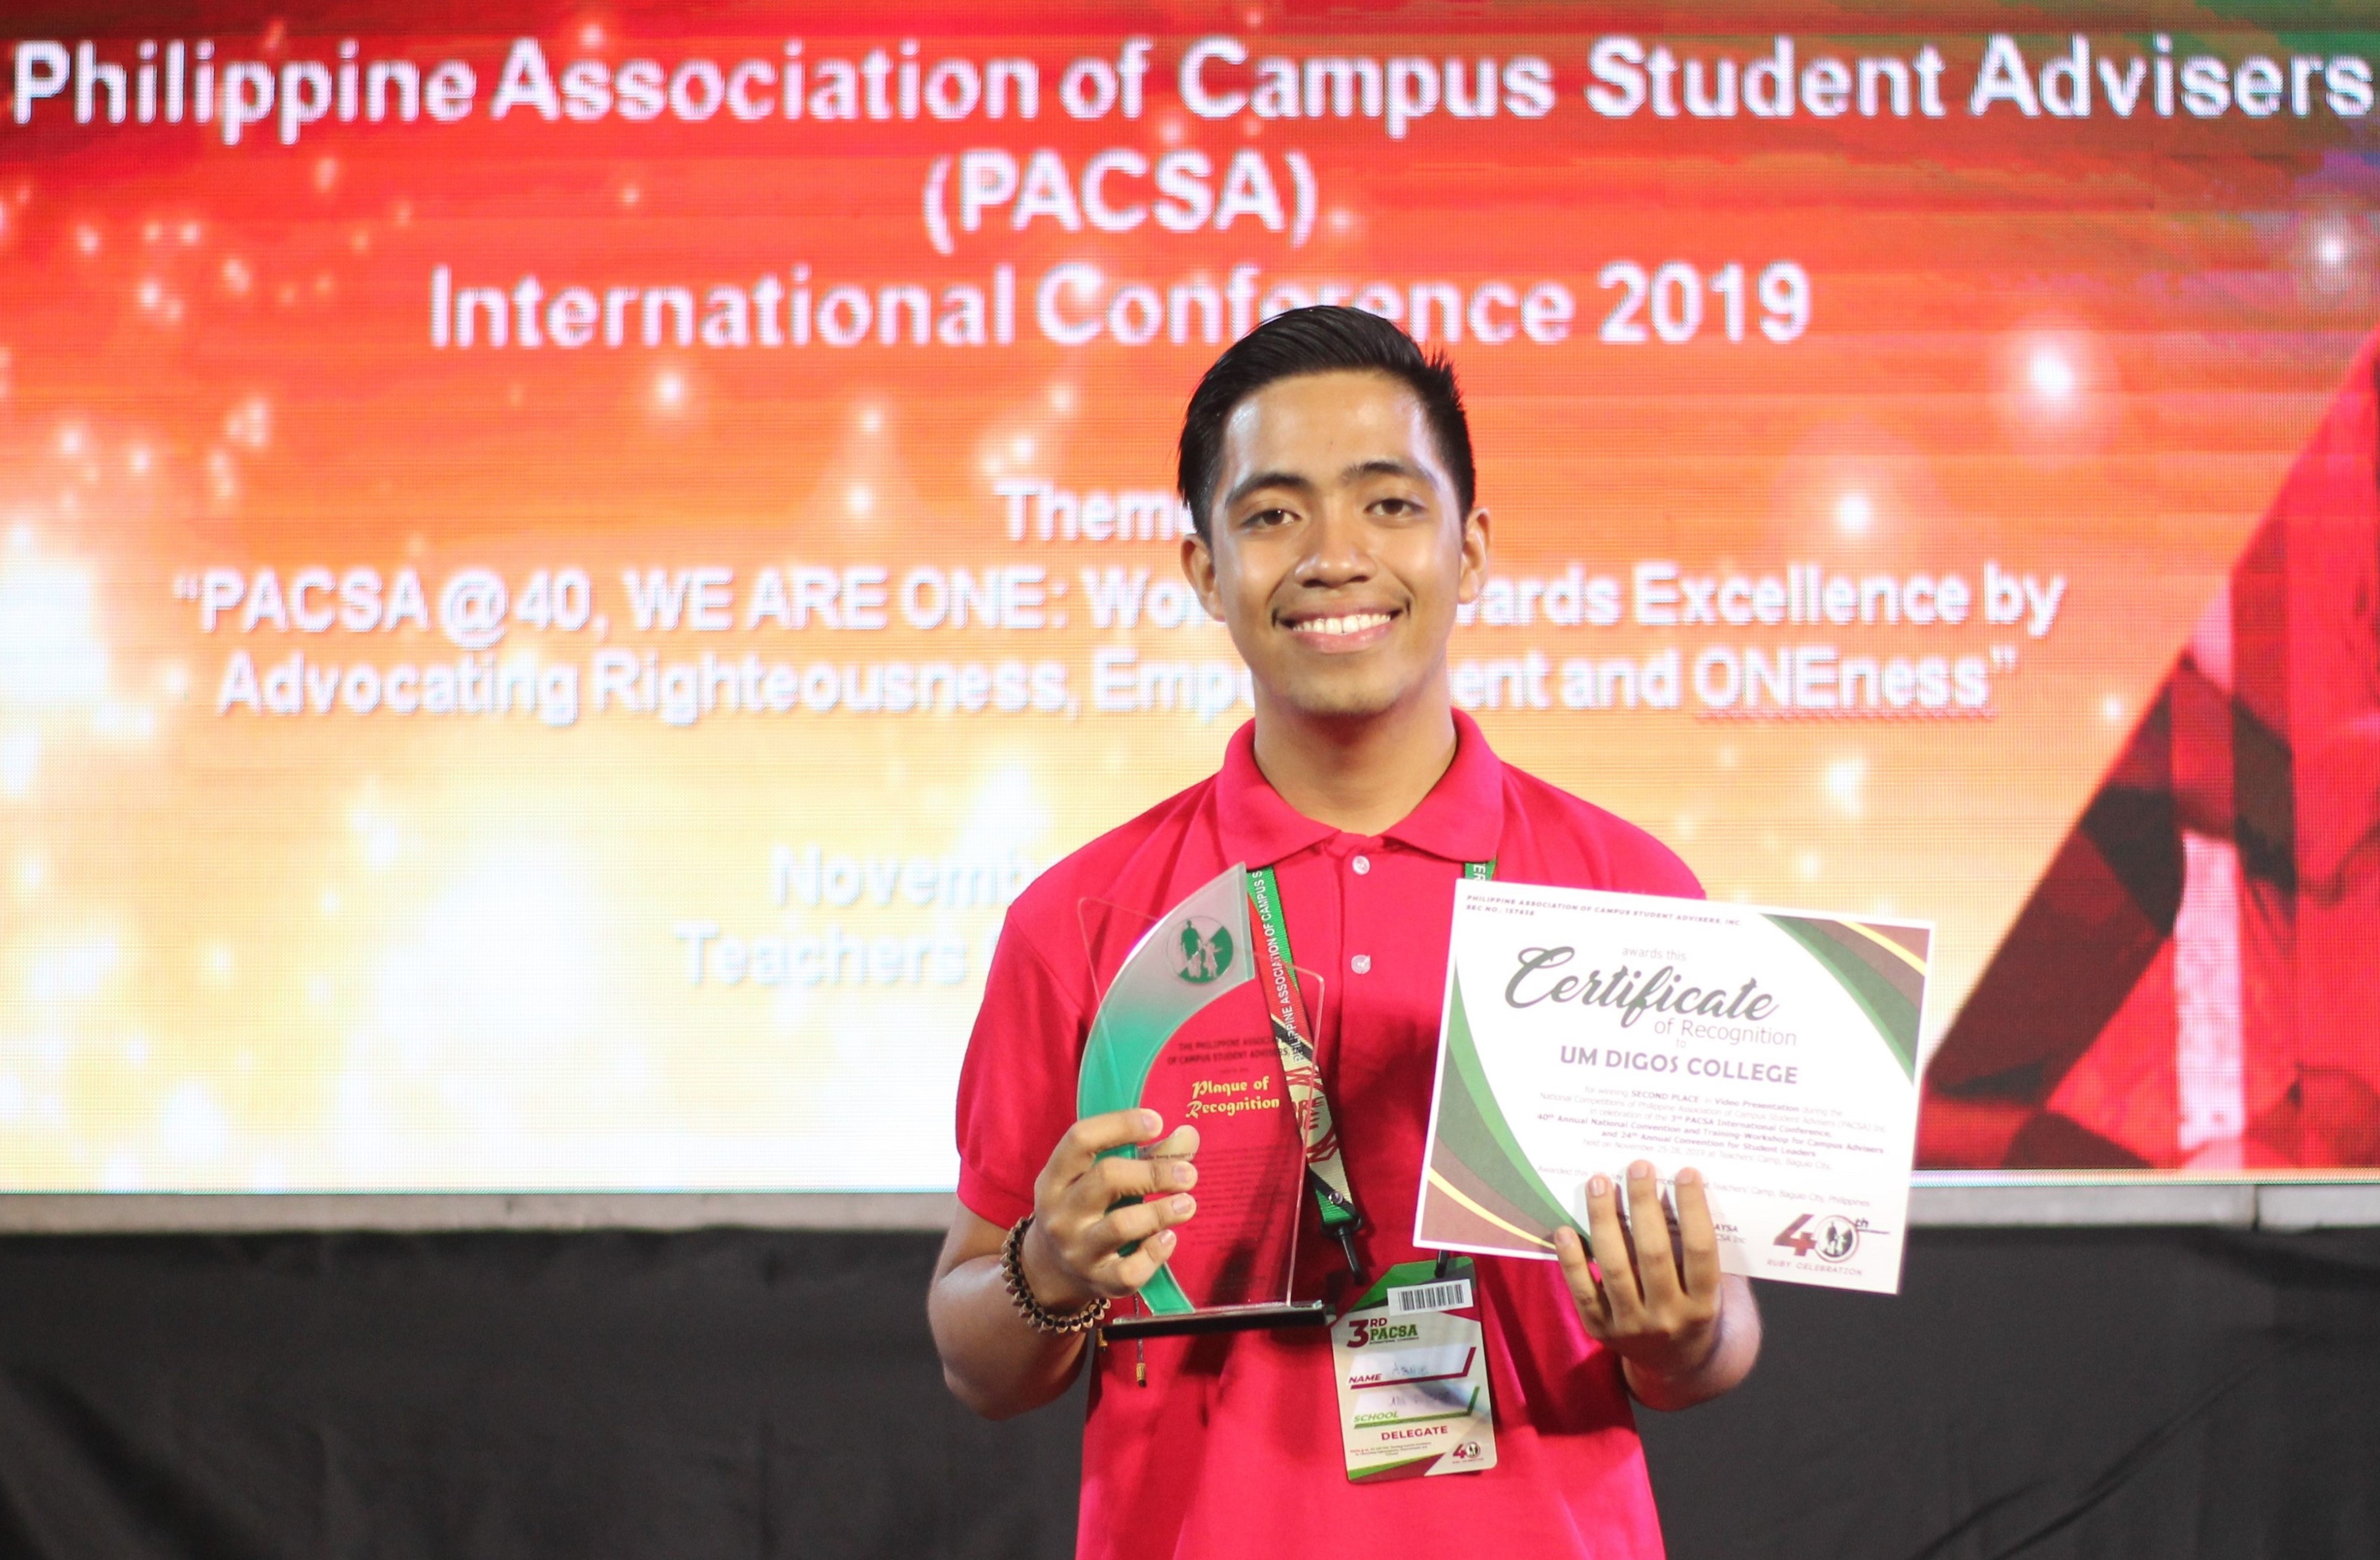 UMian wins second place for short film, elected as Mindanao student representative at 3rd PACSA